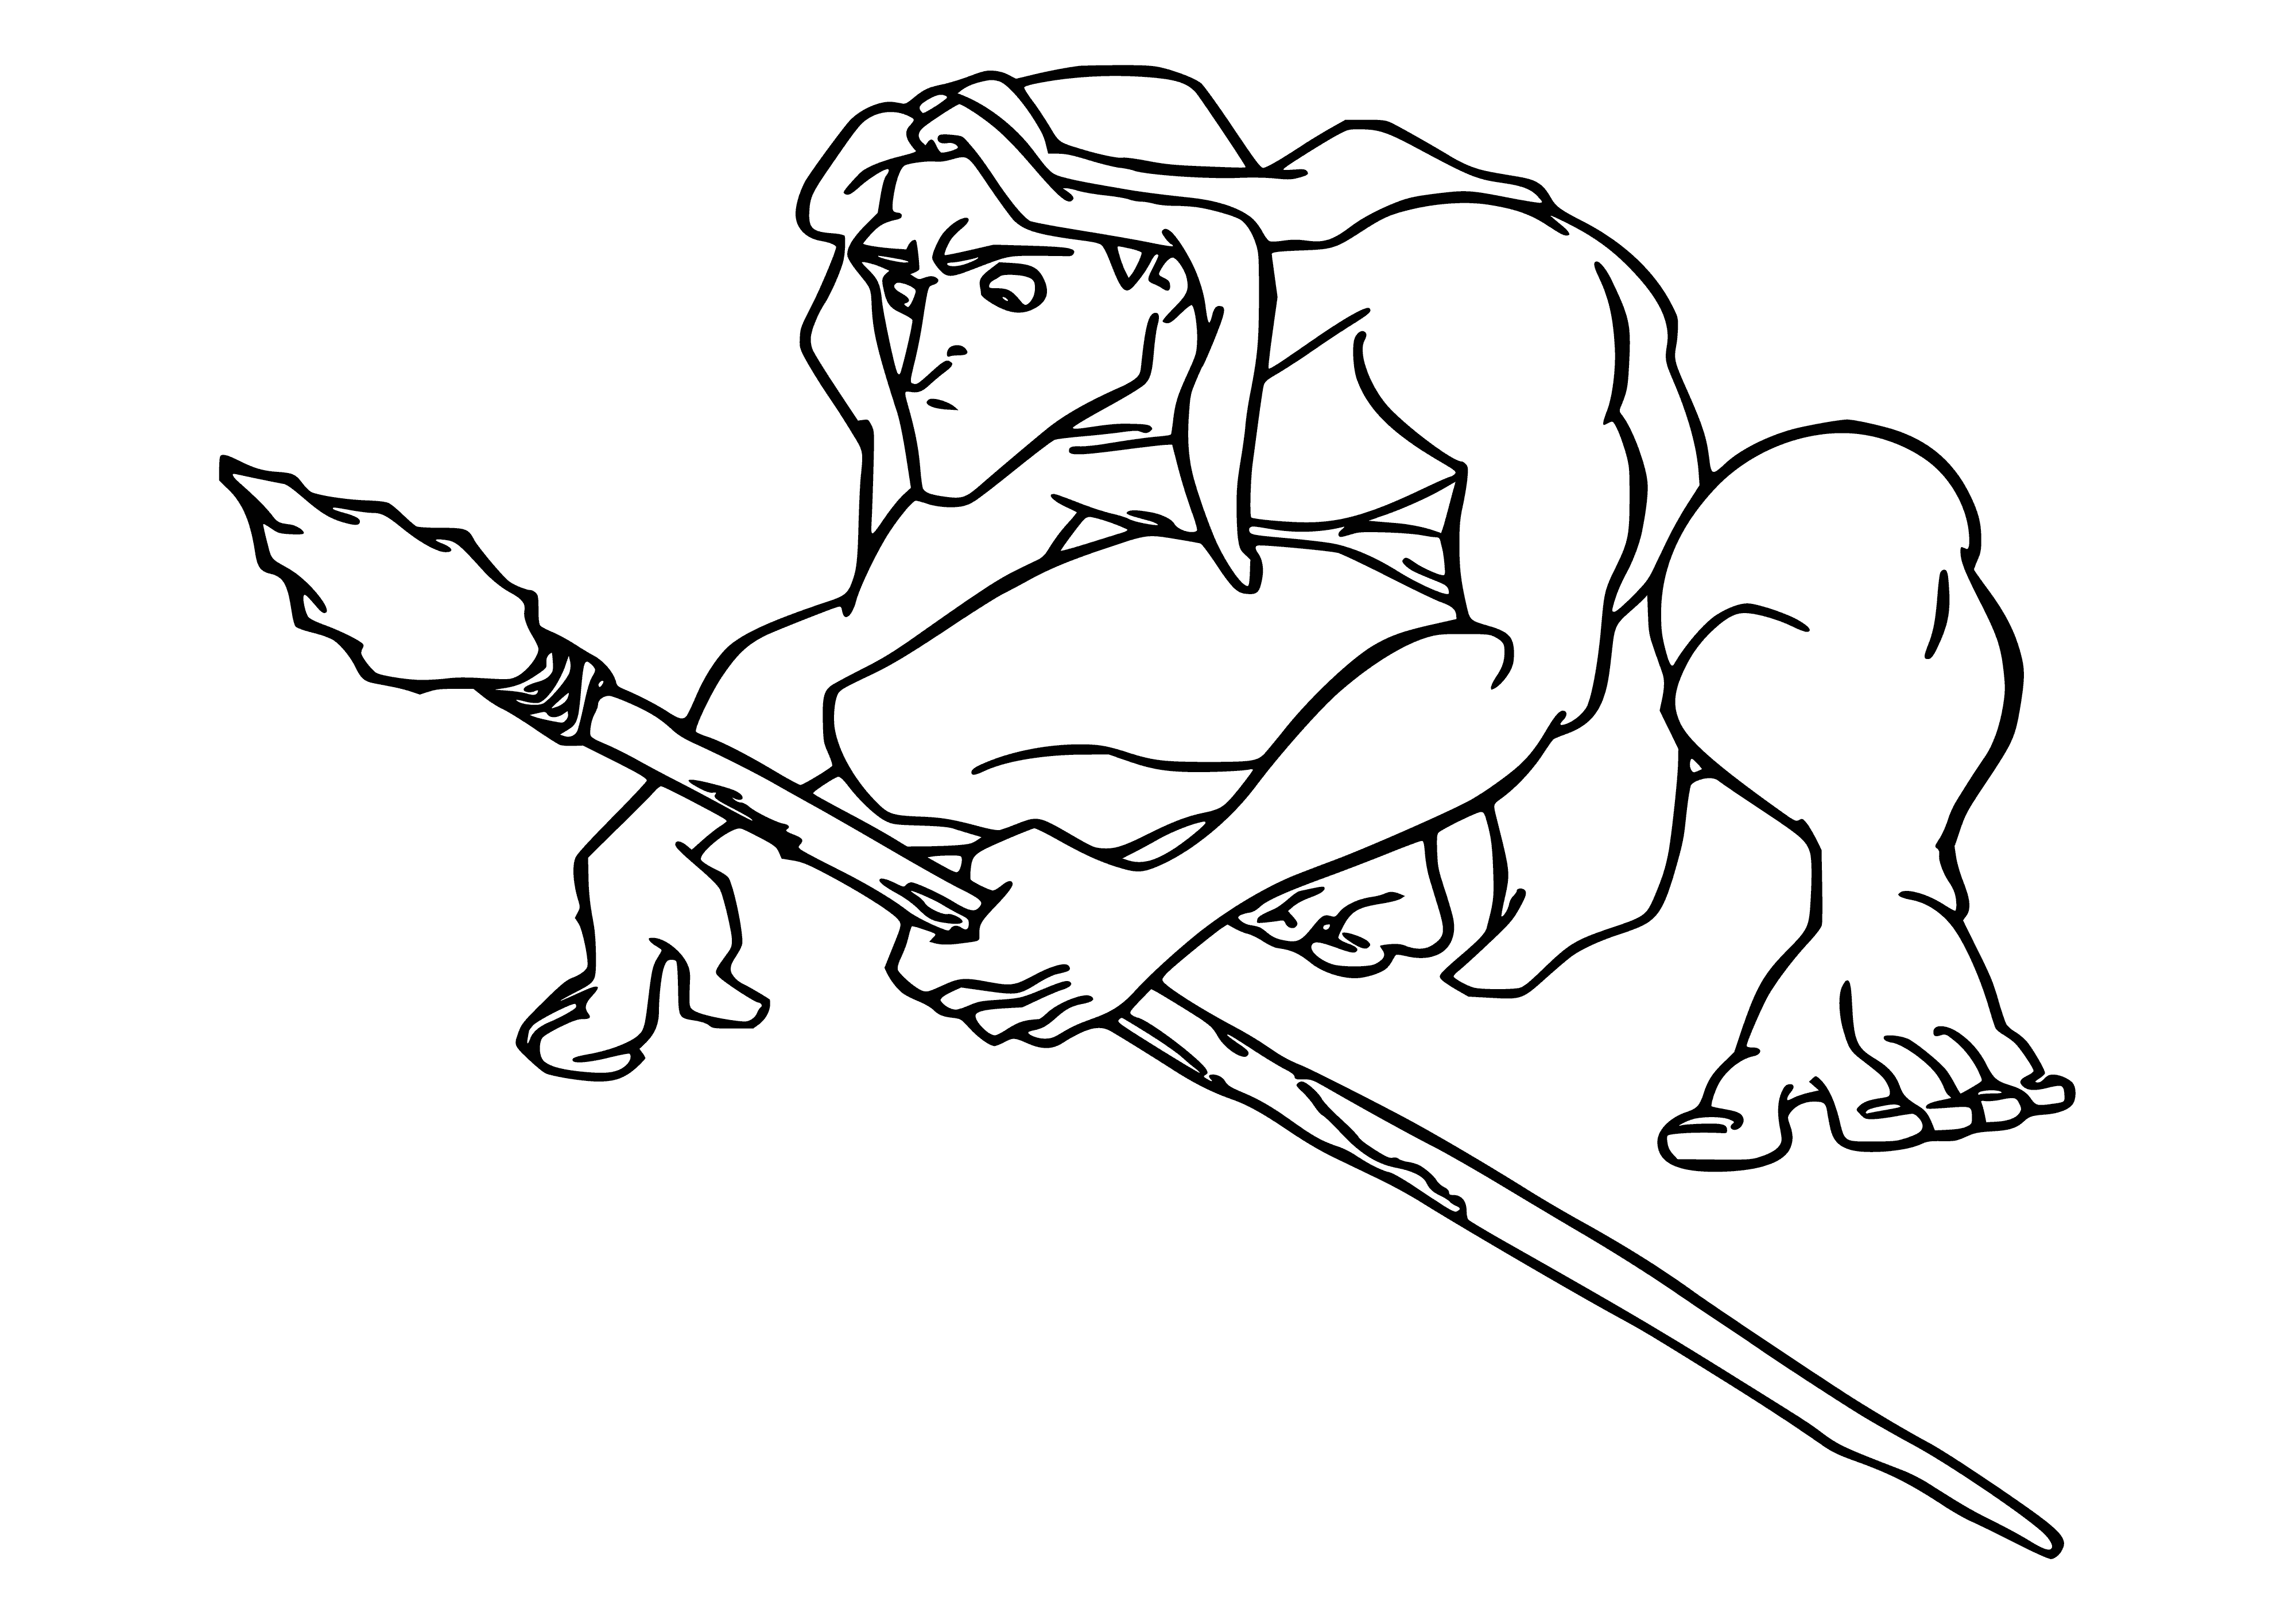 Tarzan with a spear coloring page